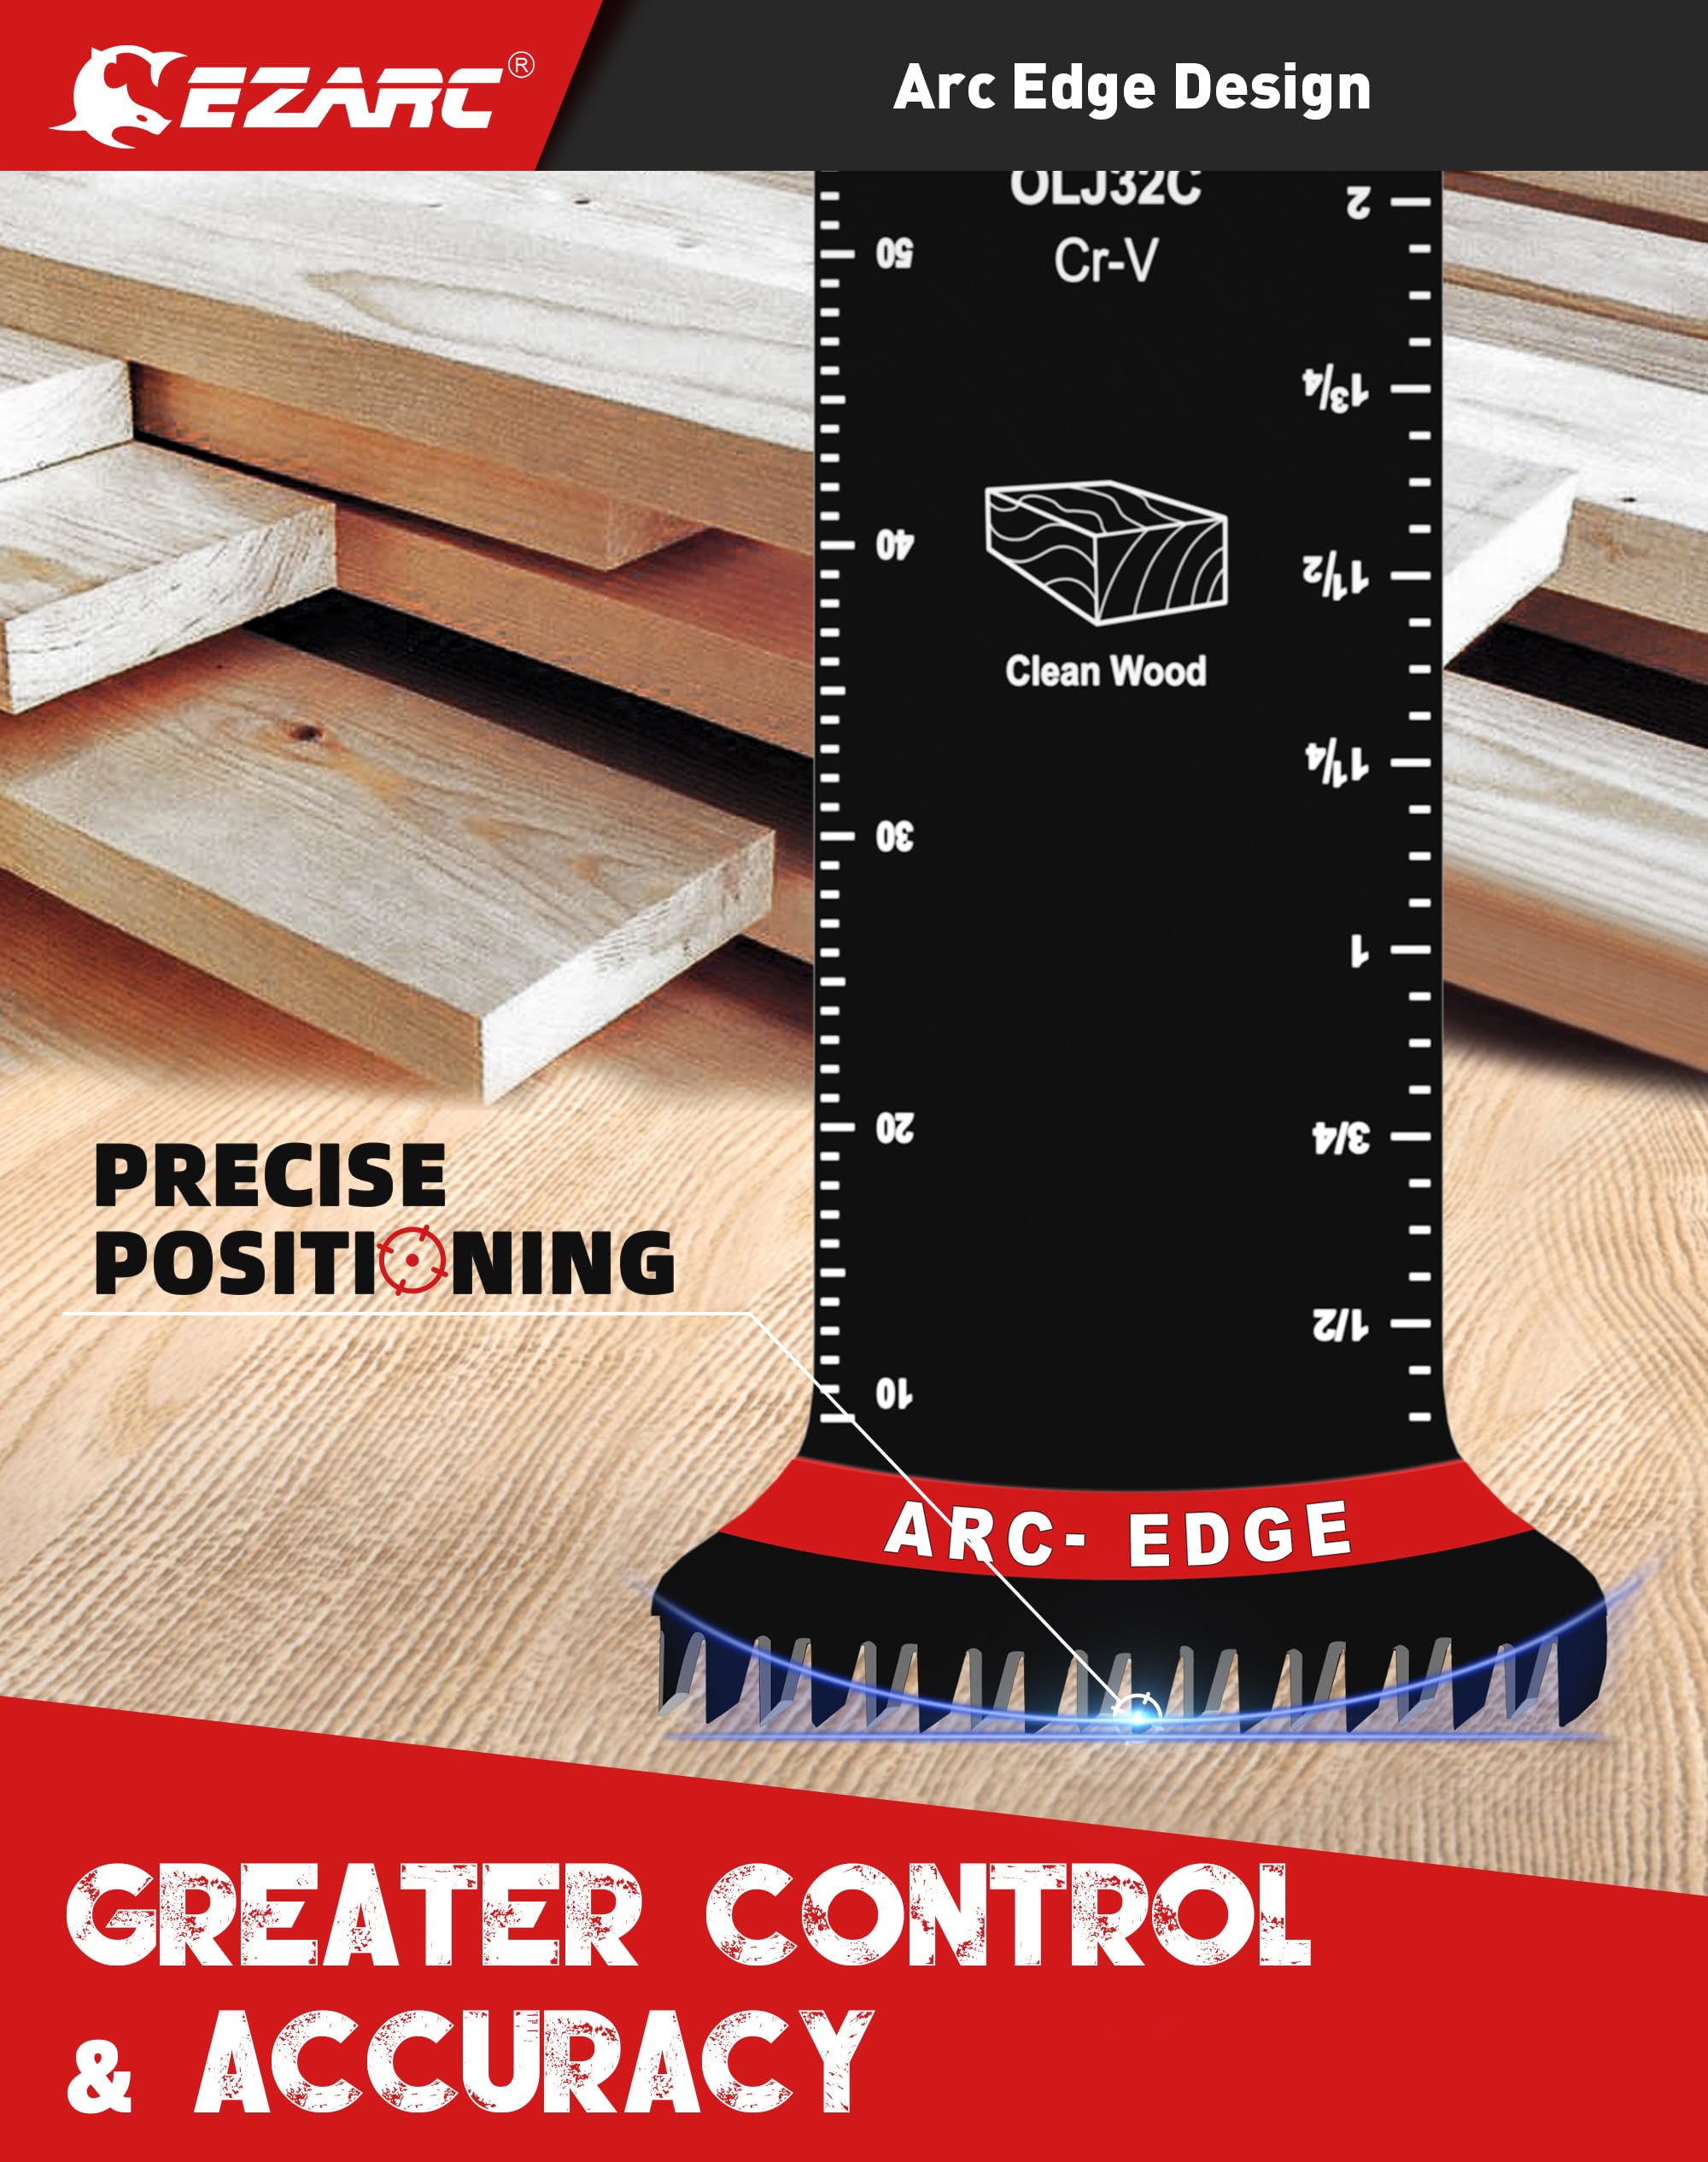 1-1/4 in. Arc Edge Oscillating Multitool Blades For General Purpose,Mixed Standard+Extra Long